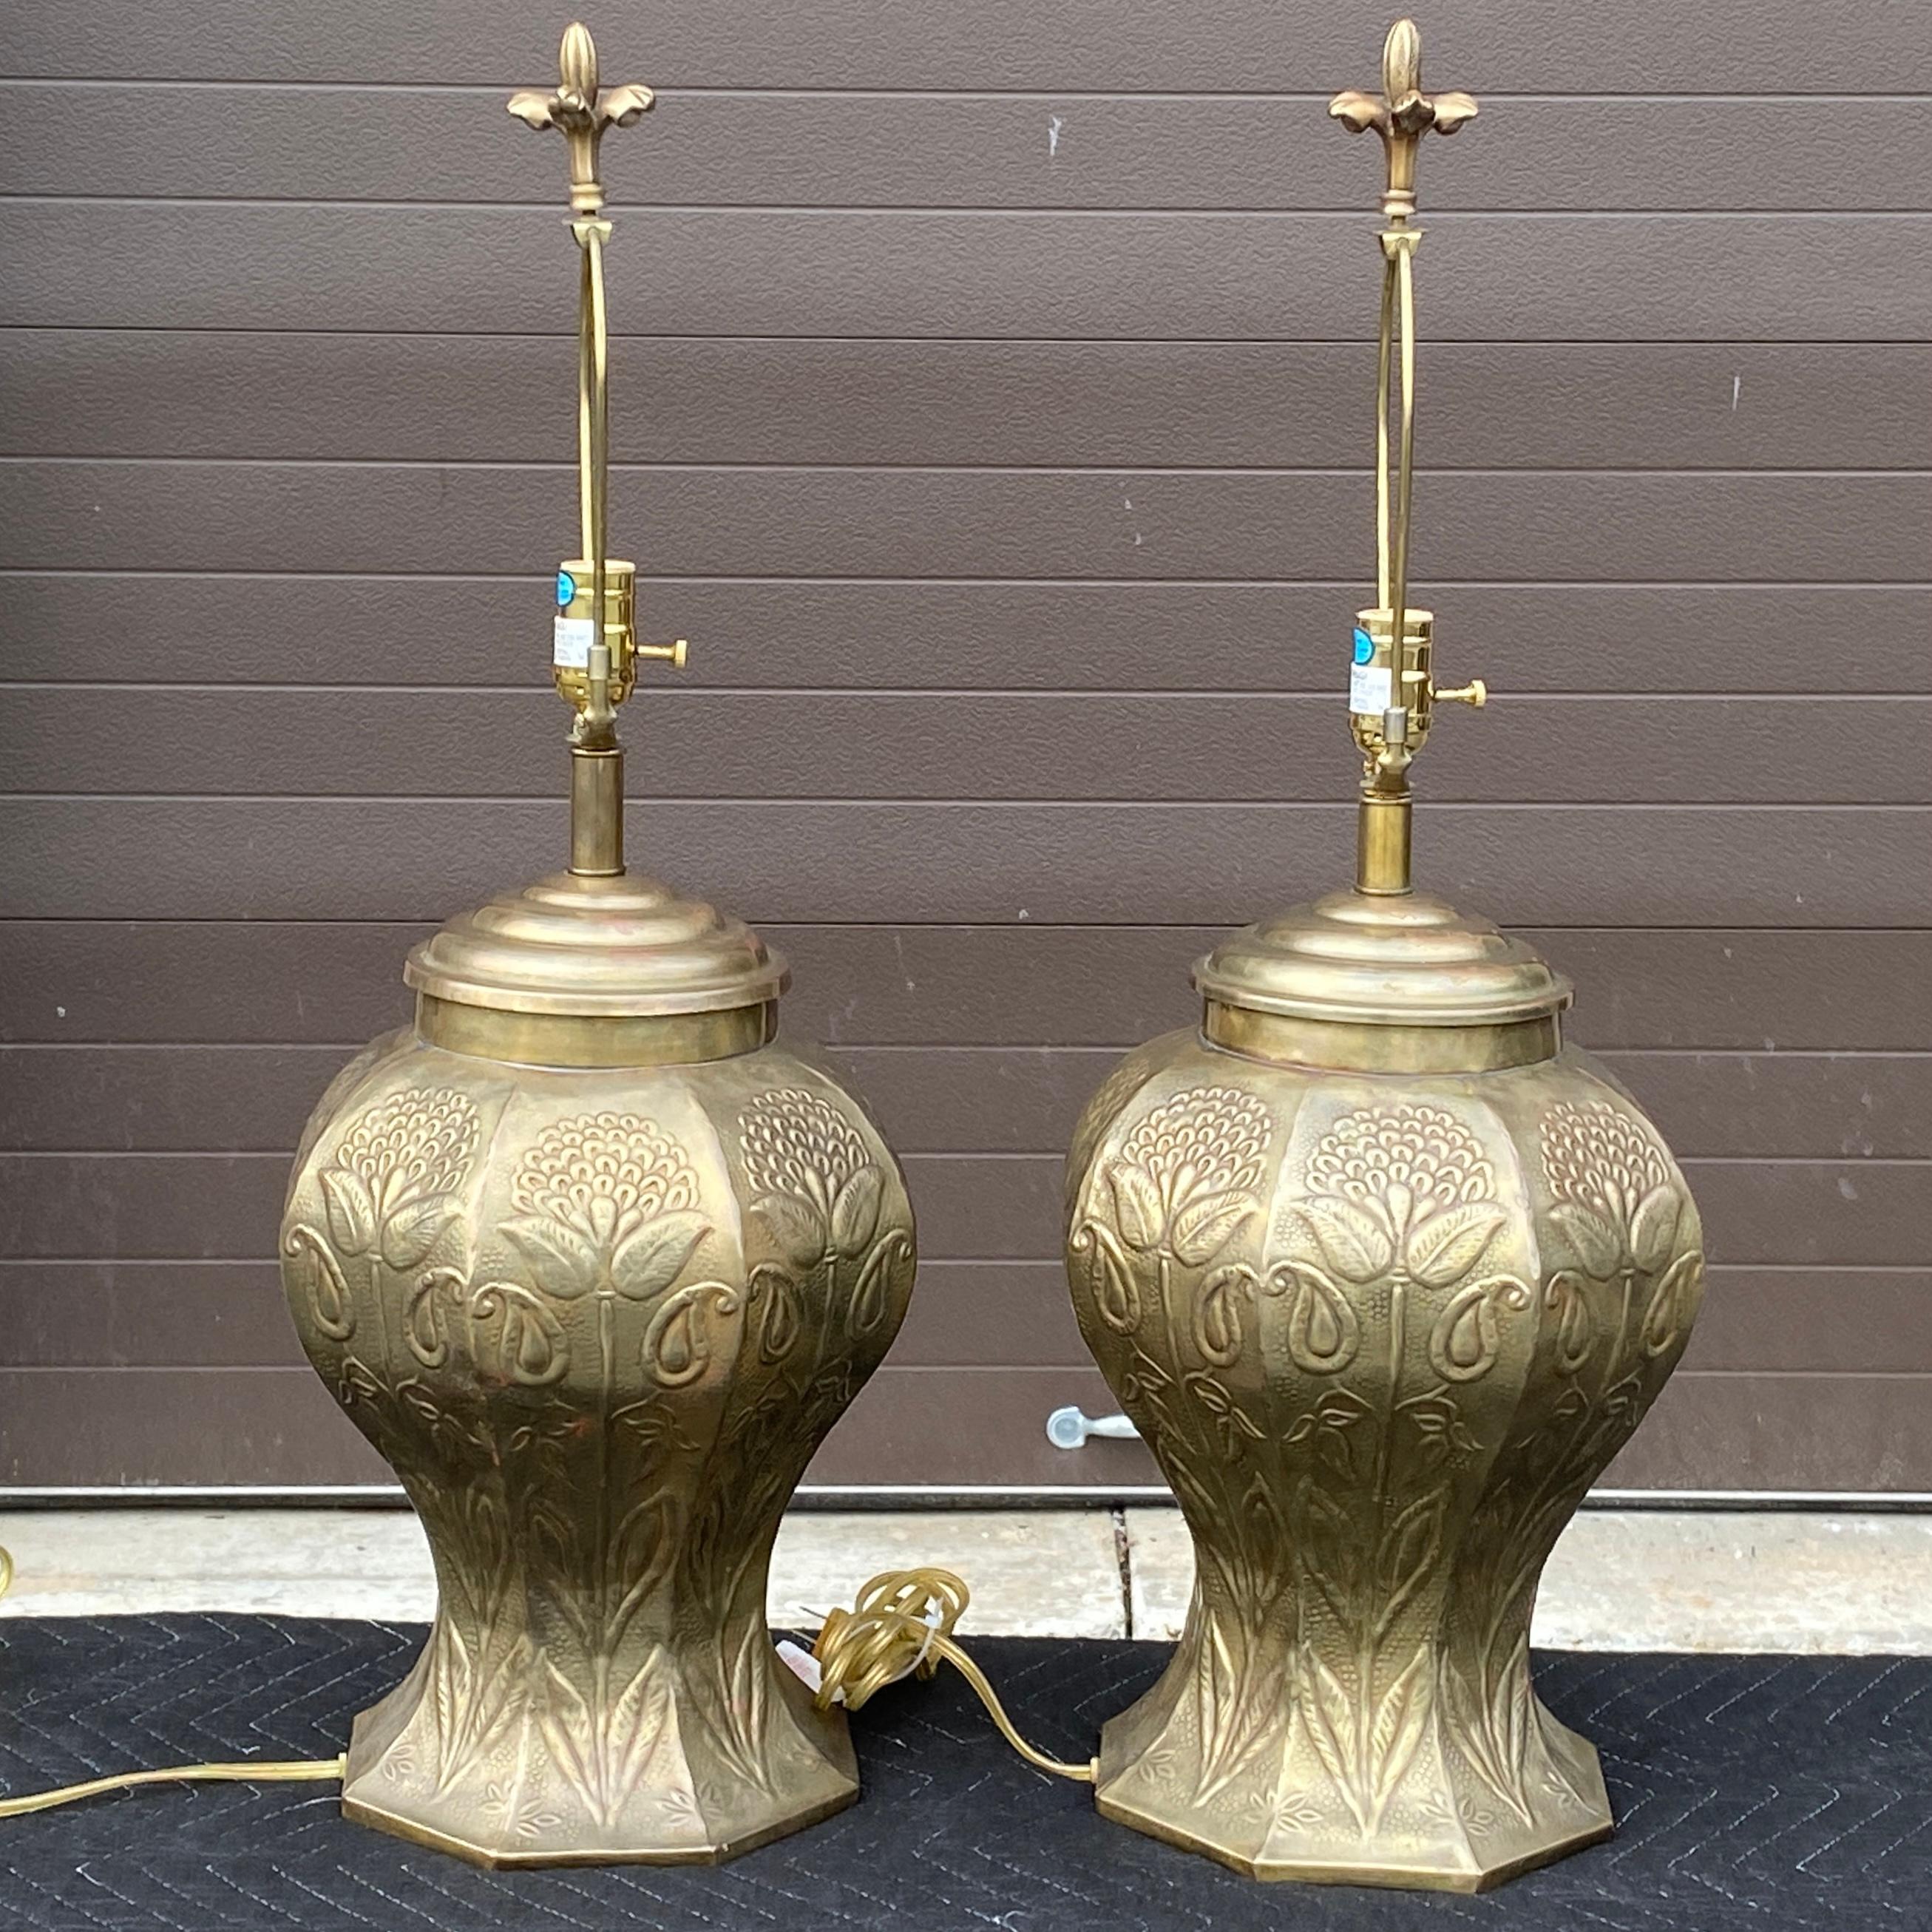 Pair John Richard Hammered Brass Table Lamps With Floral Finials In Good Condition For Sale In West Chester, PA